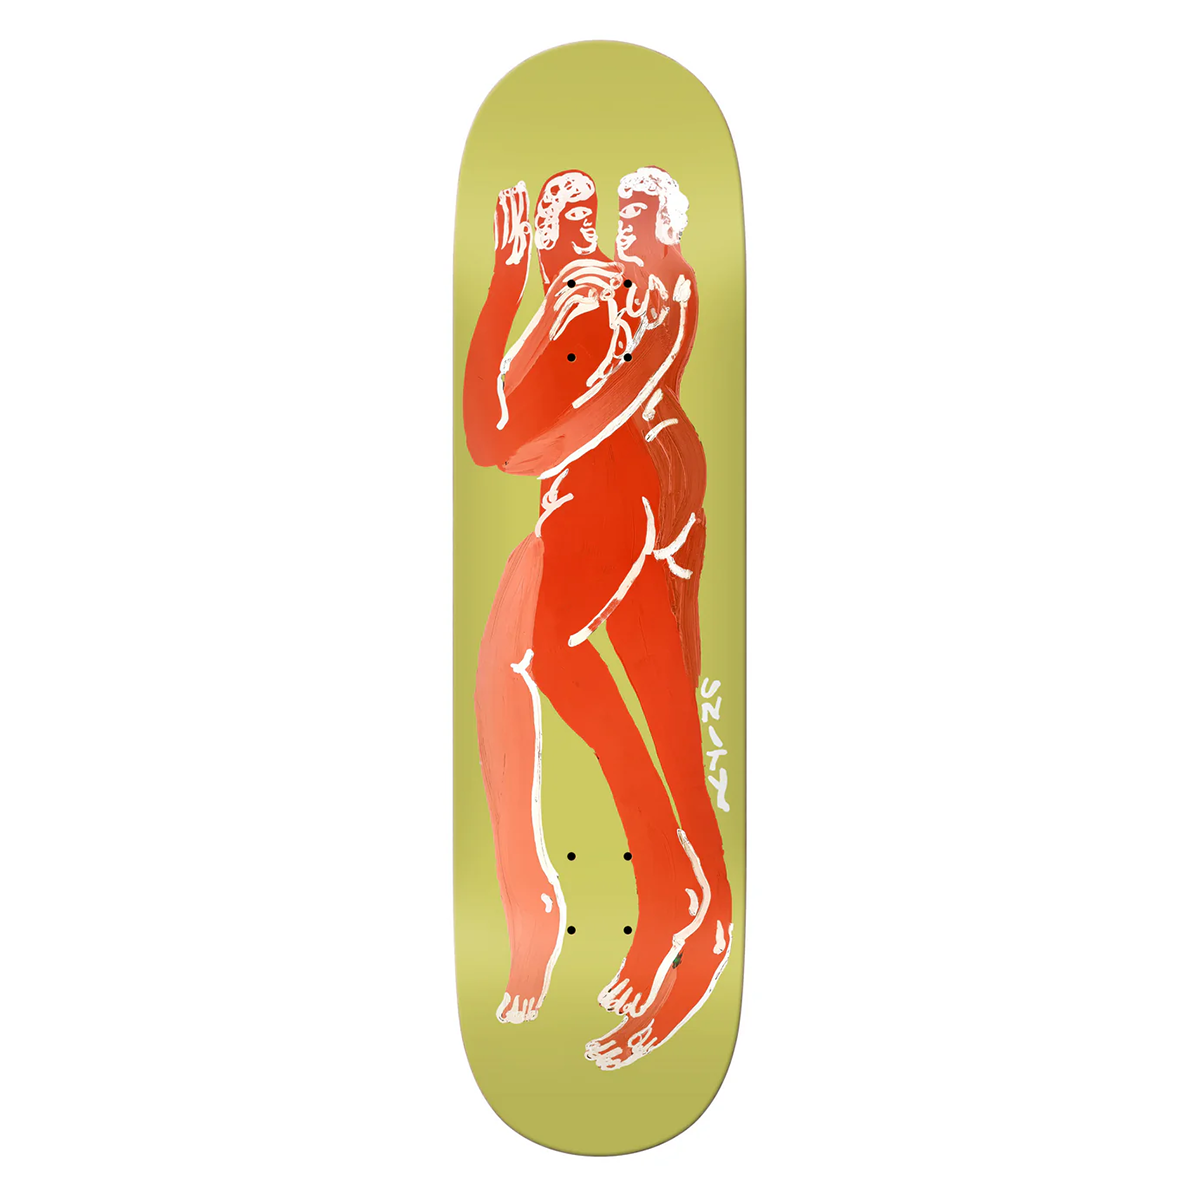 There Unity You and Me Skate Deck - 8.06